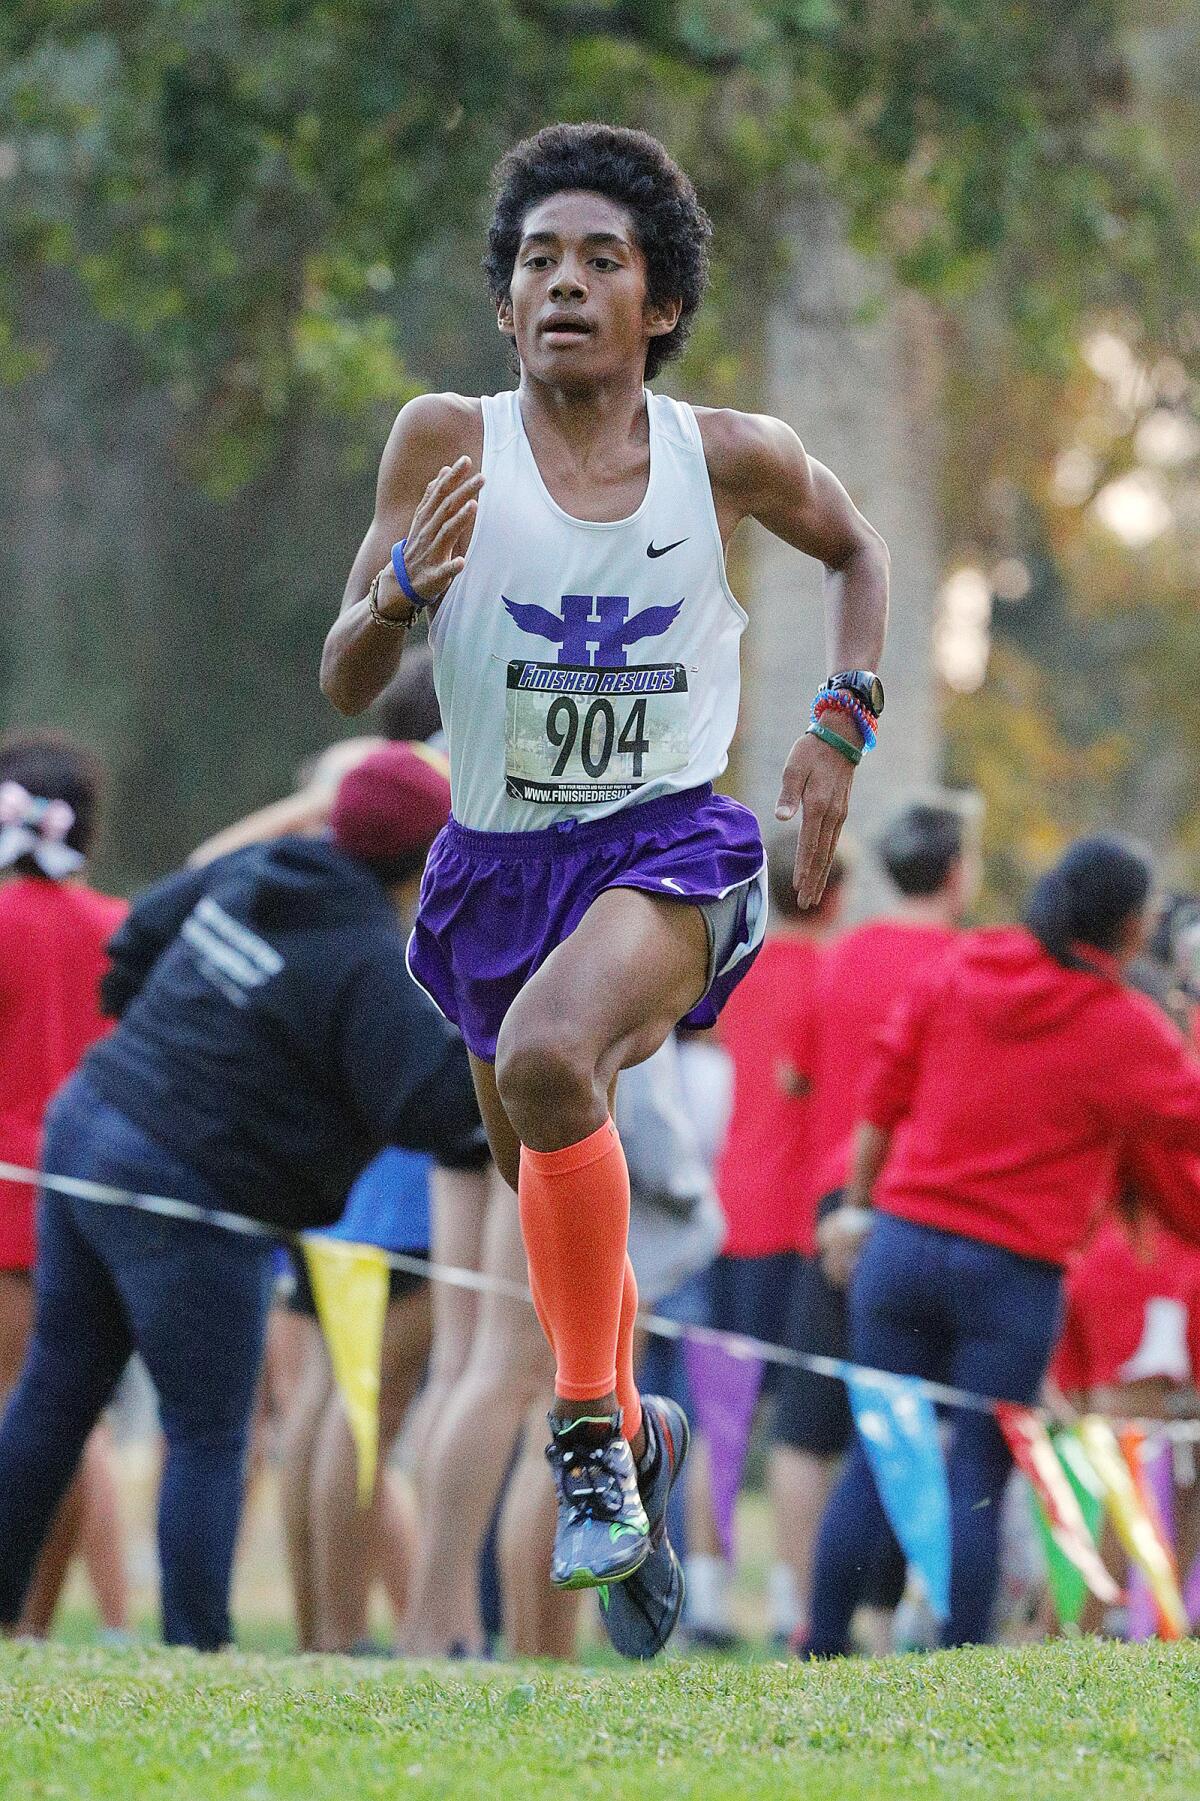 Hoover's Parker Simmons runs to the finish in thirtieth place in a Pacific League cross country meet at Arcadia Park in Arcadia on Thursday, November 7, 2019. This is the final league meet of the season.